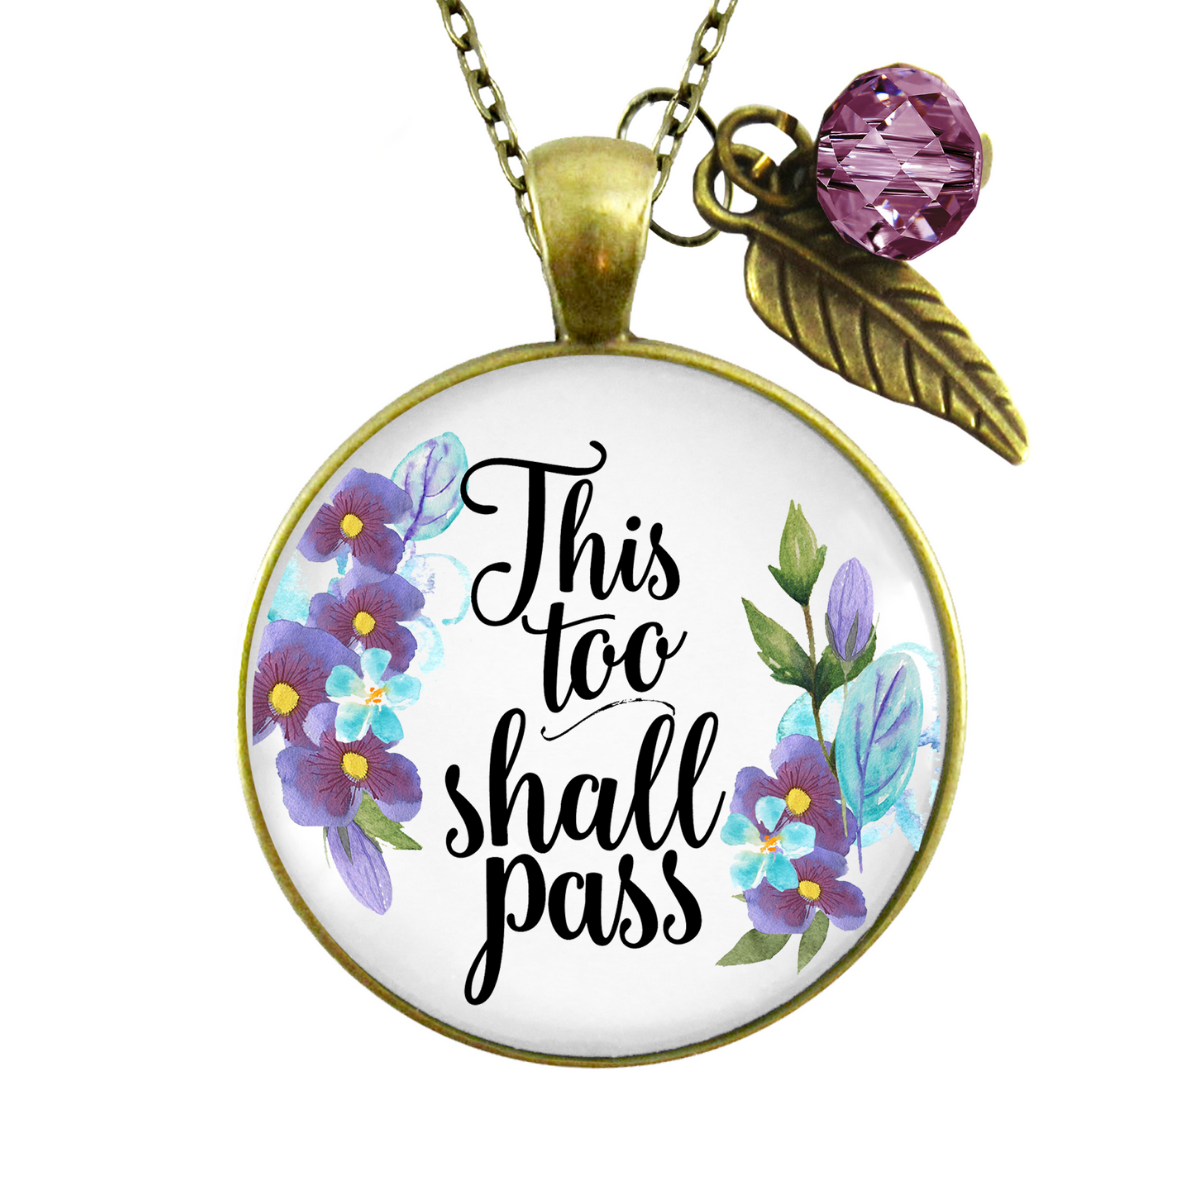 Gutsy Goodness This Too Shall Pass Necklace Inspirational Floral Watercolor Jewelry - Gutsy Goodness Handmade Jewelry;This Too Shall Pass Necklace Inspirational Floral Watercolor Jewelry - Gutsy Goodness Handmade Jewelry Gifts